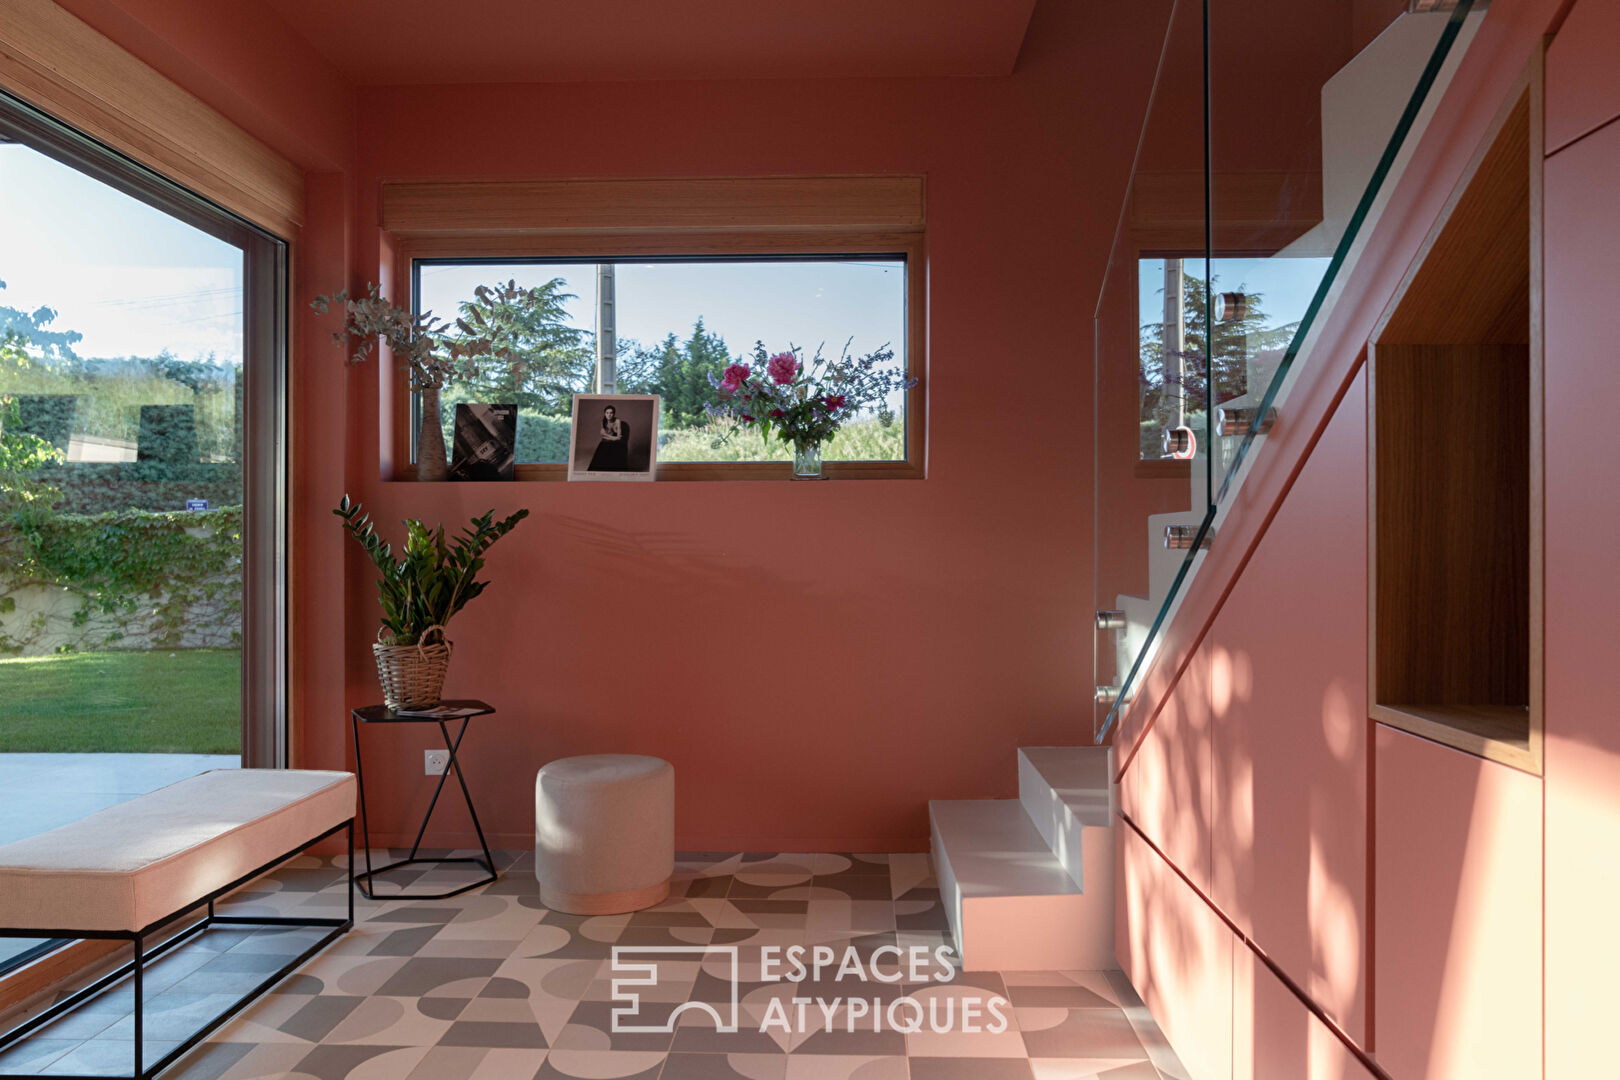 The pink studio house